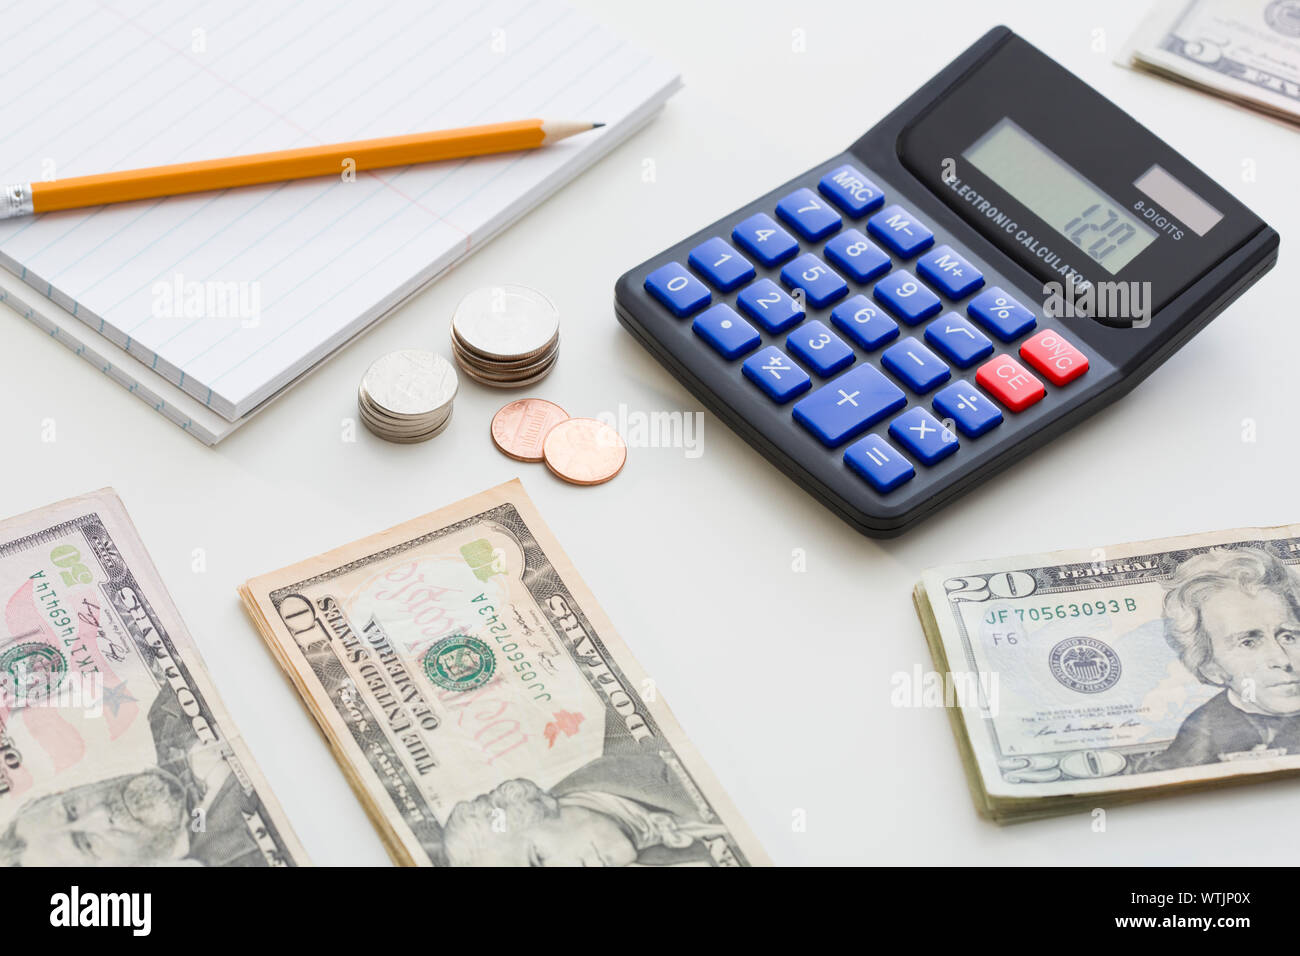 Calculator and US currency on desk Stock Photo